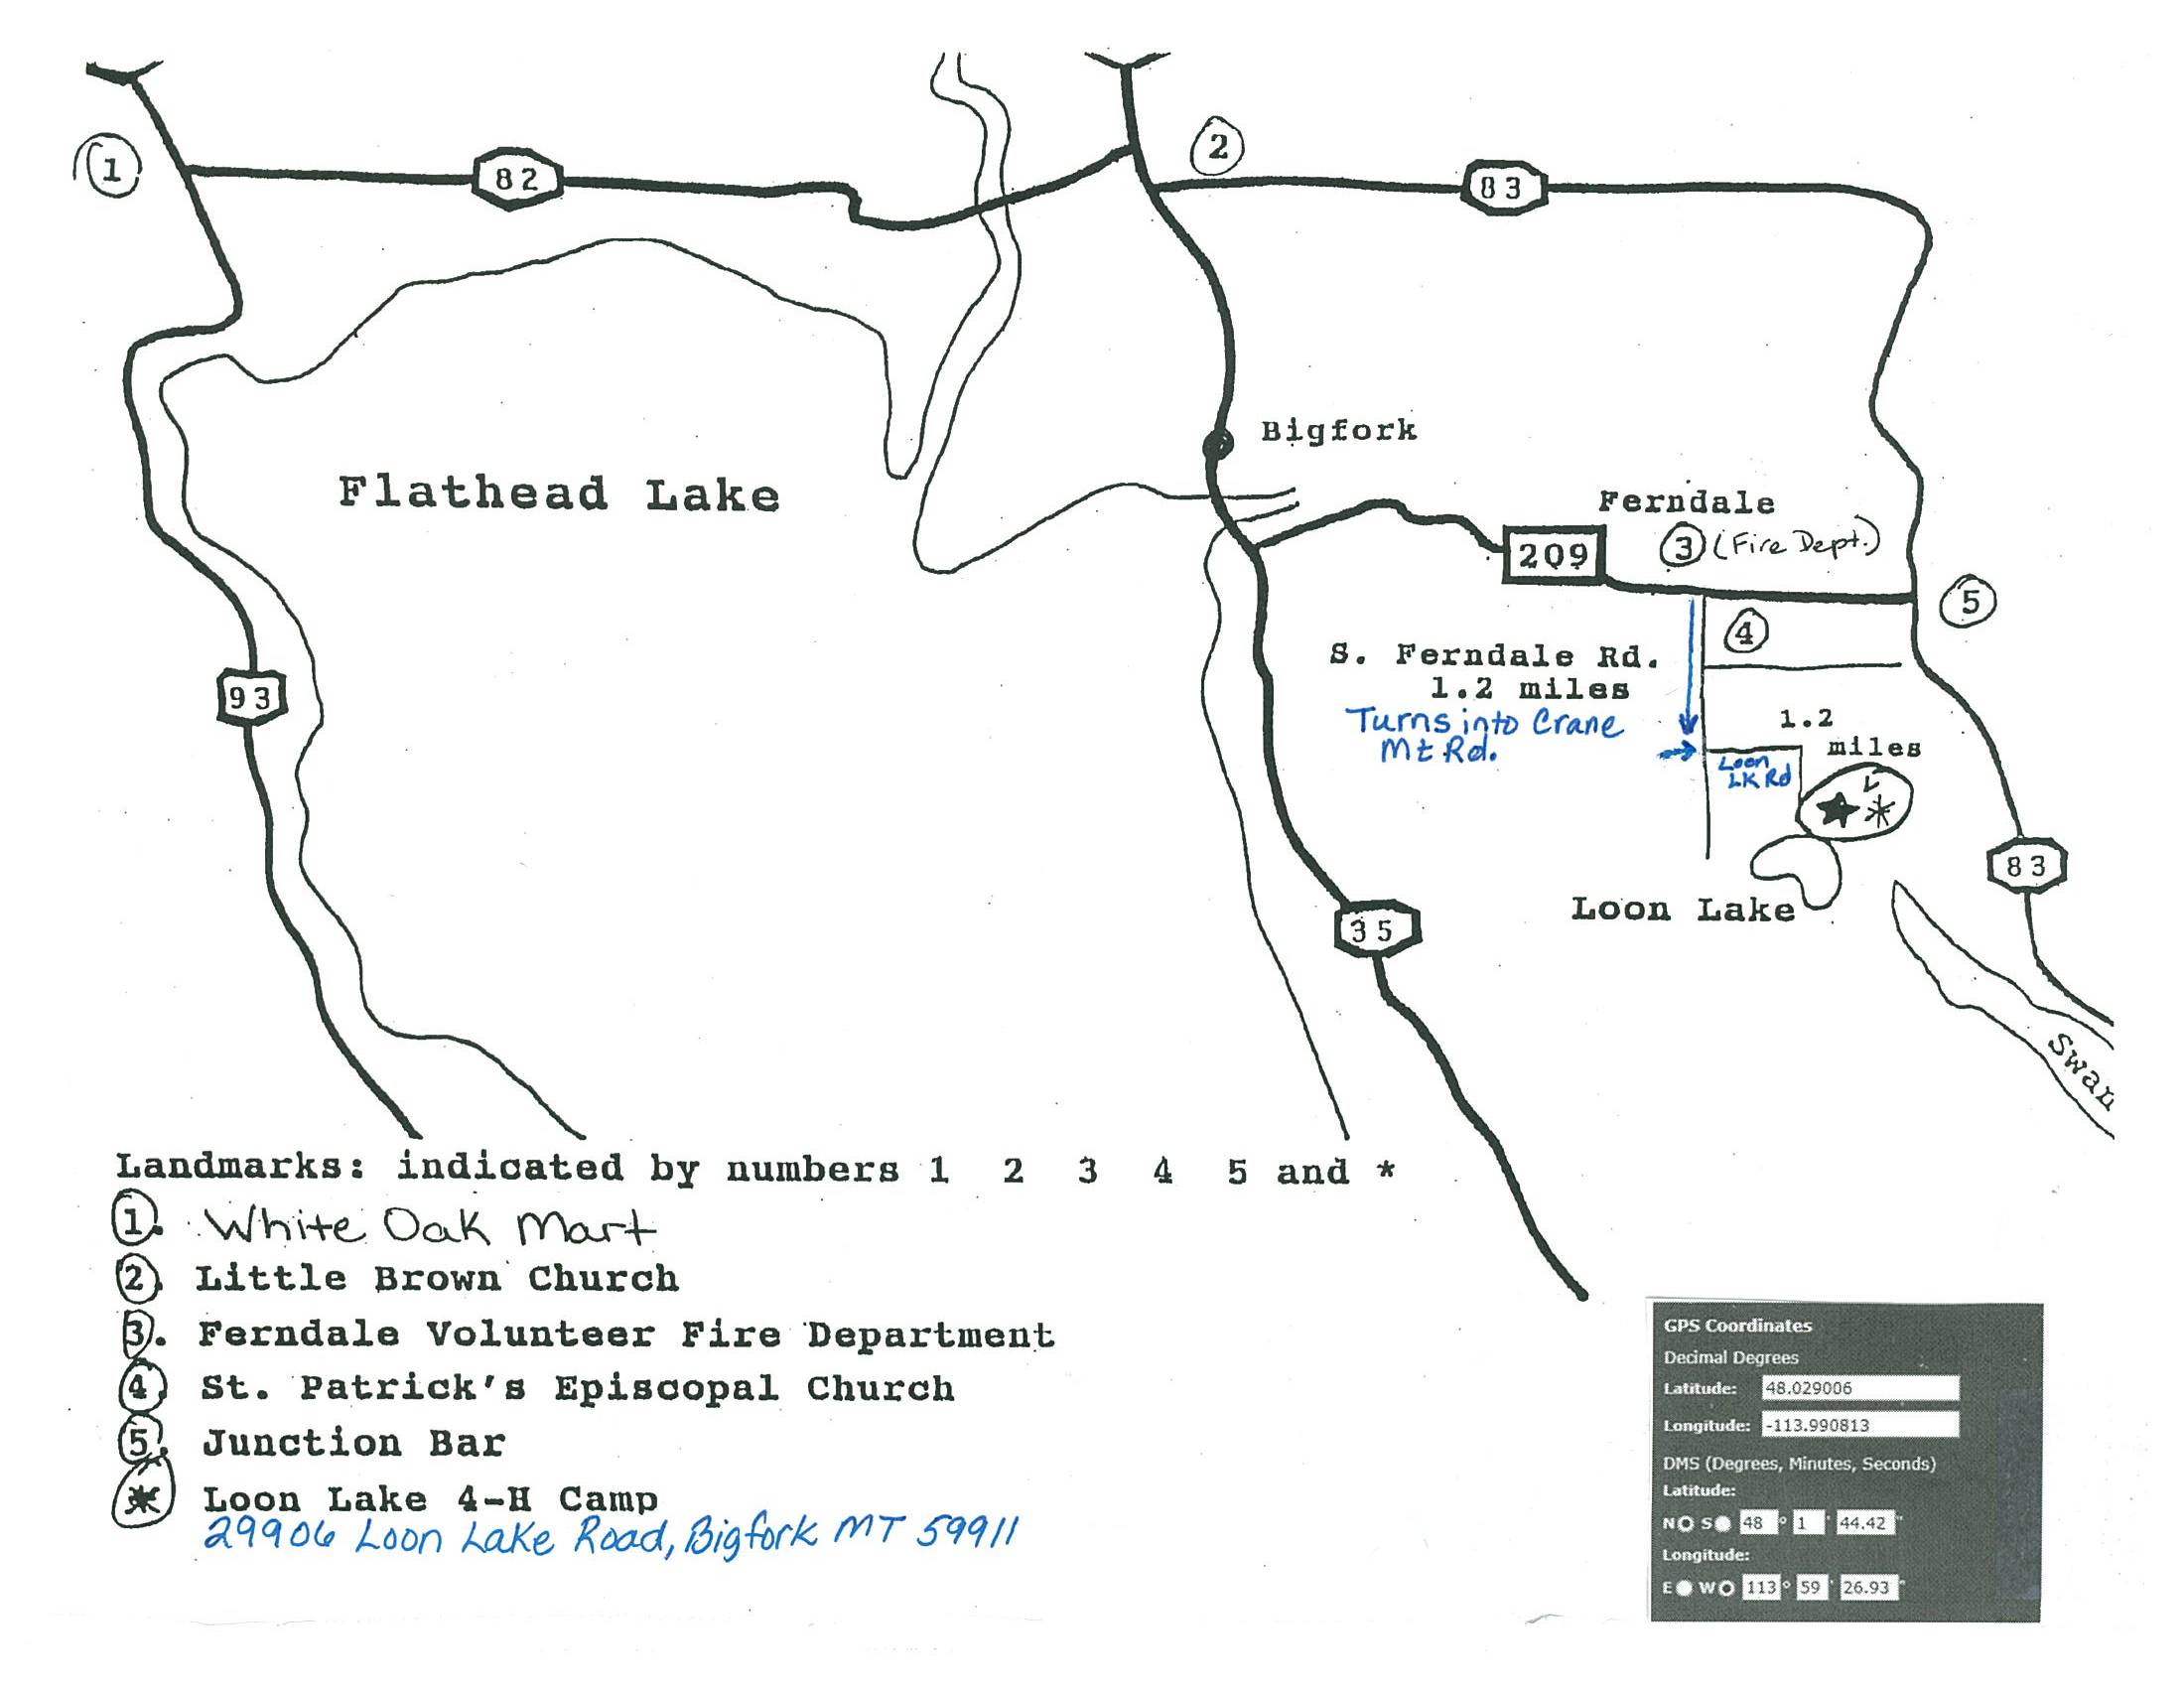 image of a map to the Darrell Fenner Loon Lake 4-H Camp